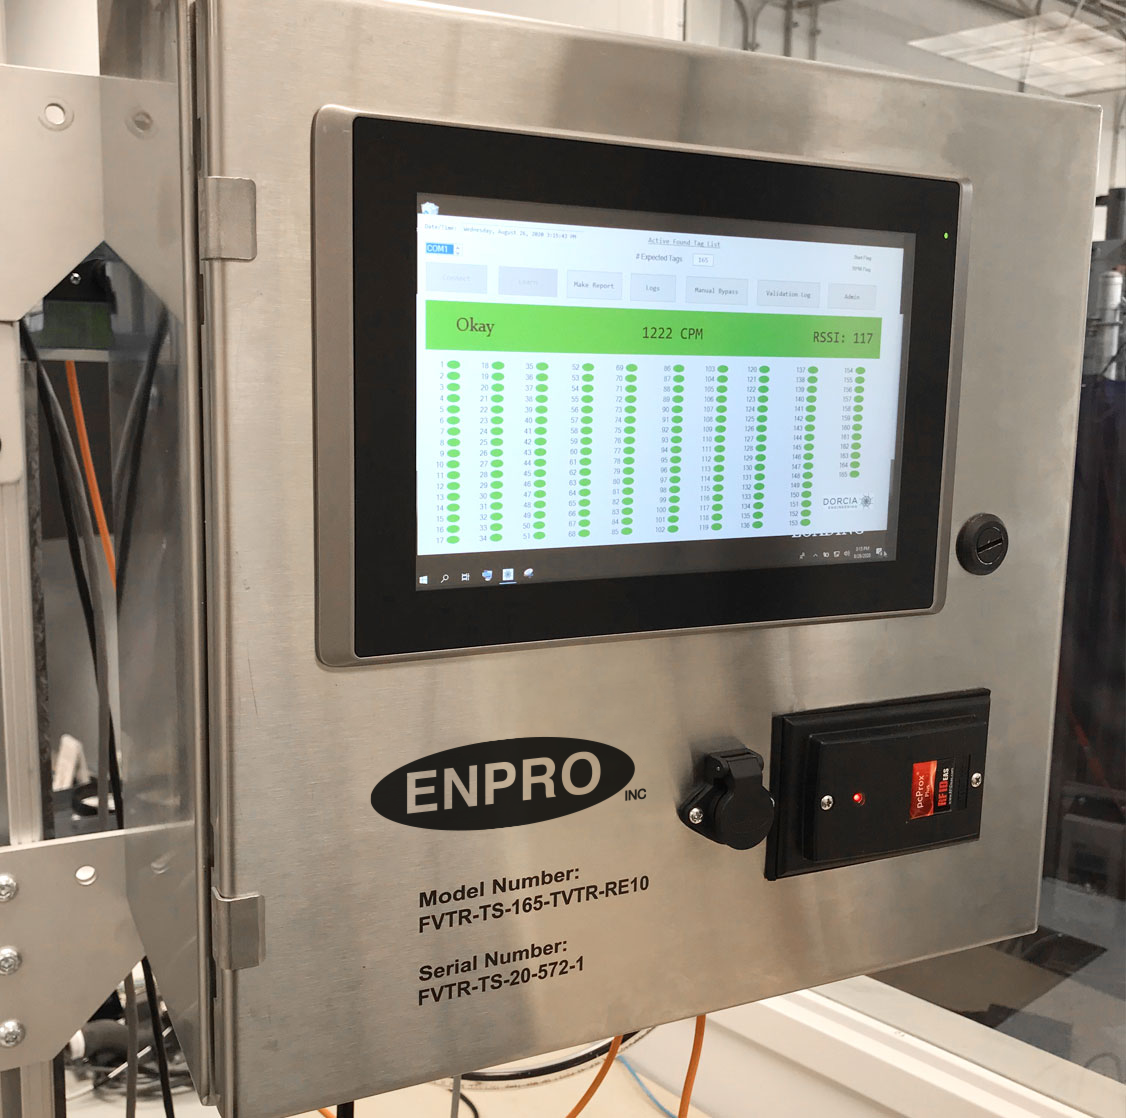 Enpro Filler Vent Tube Reader. Reduce waste and downtime associated with missing vent tube incidents and malfunctions in the beverage filling process.